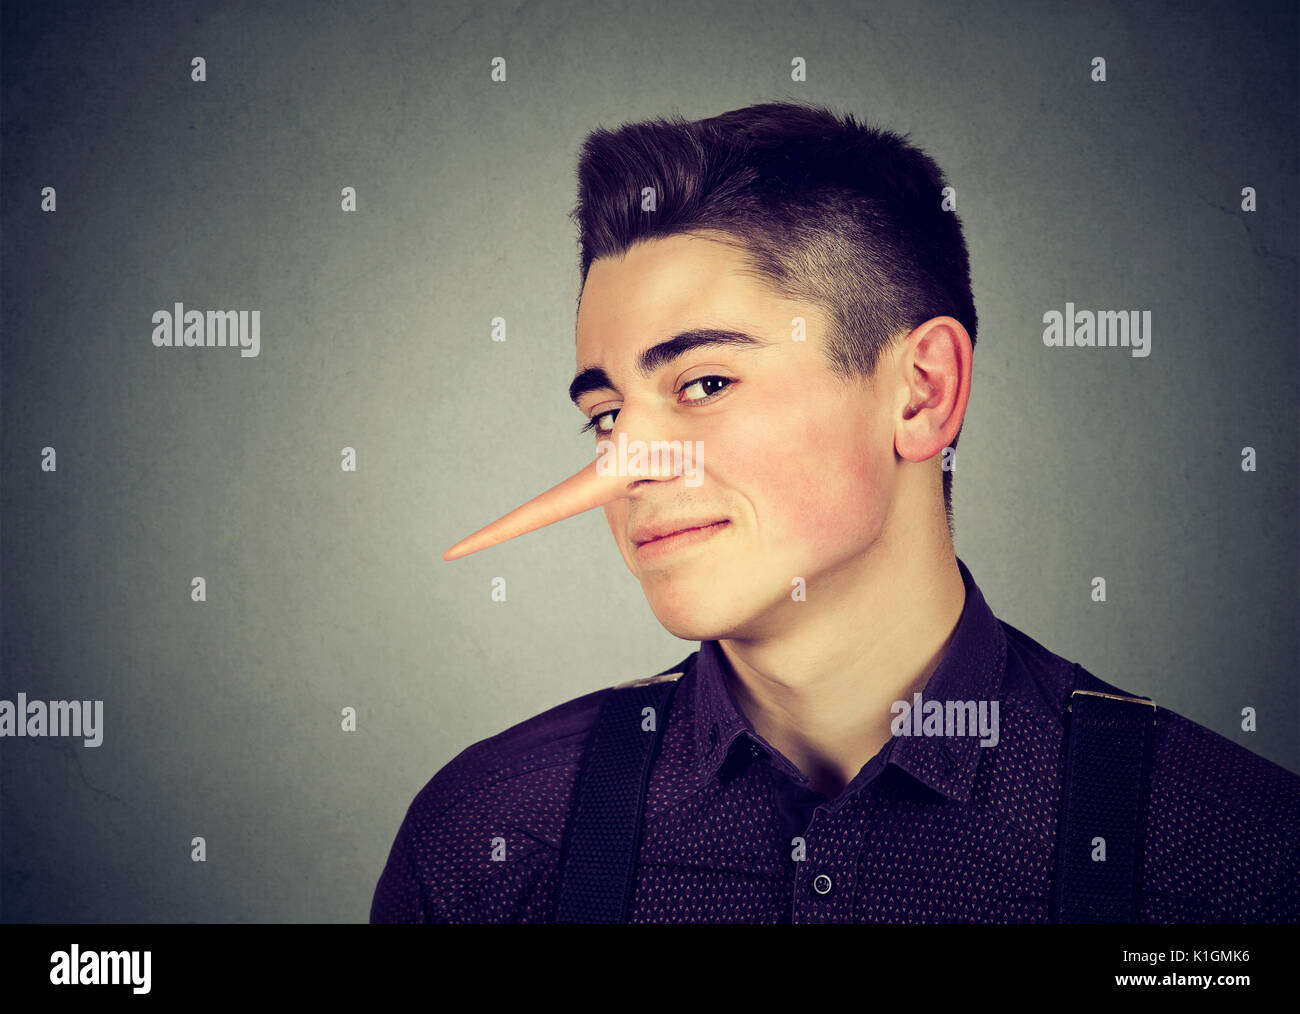 Liar funny looking young man Stock Photo